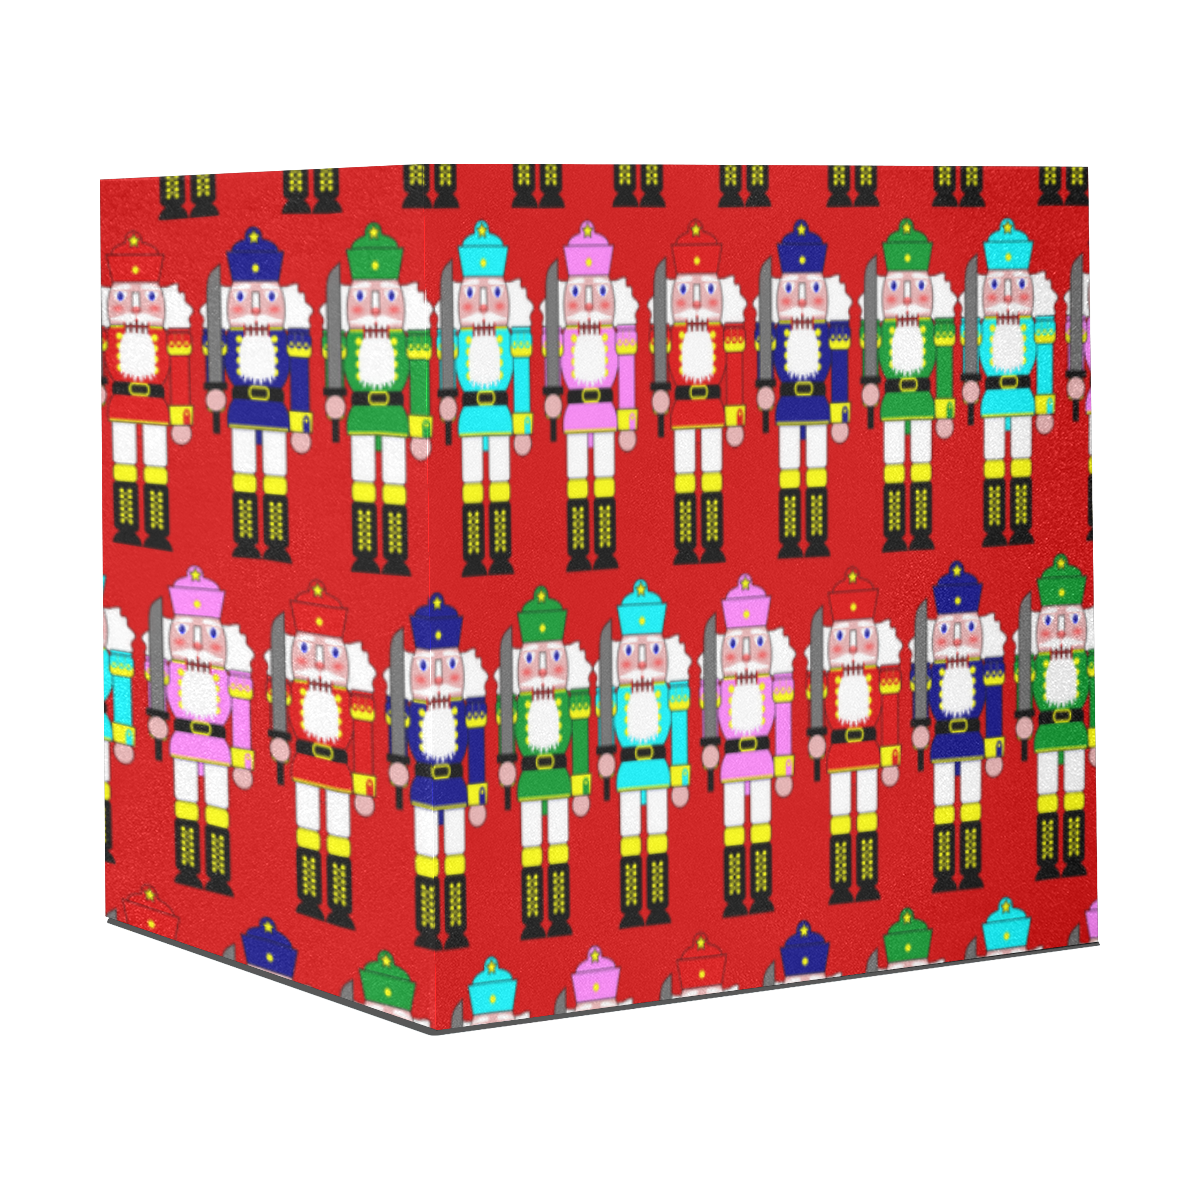 Christmas Nutcracker Toy Soldiers on Red Gift Wrapping Paper 58"x 23" (1 Roll)